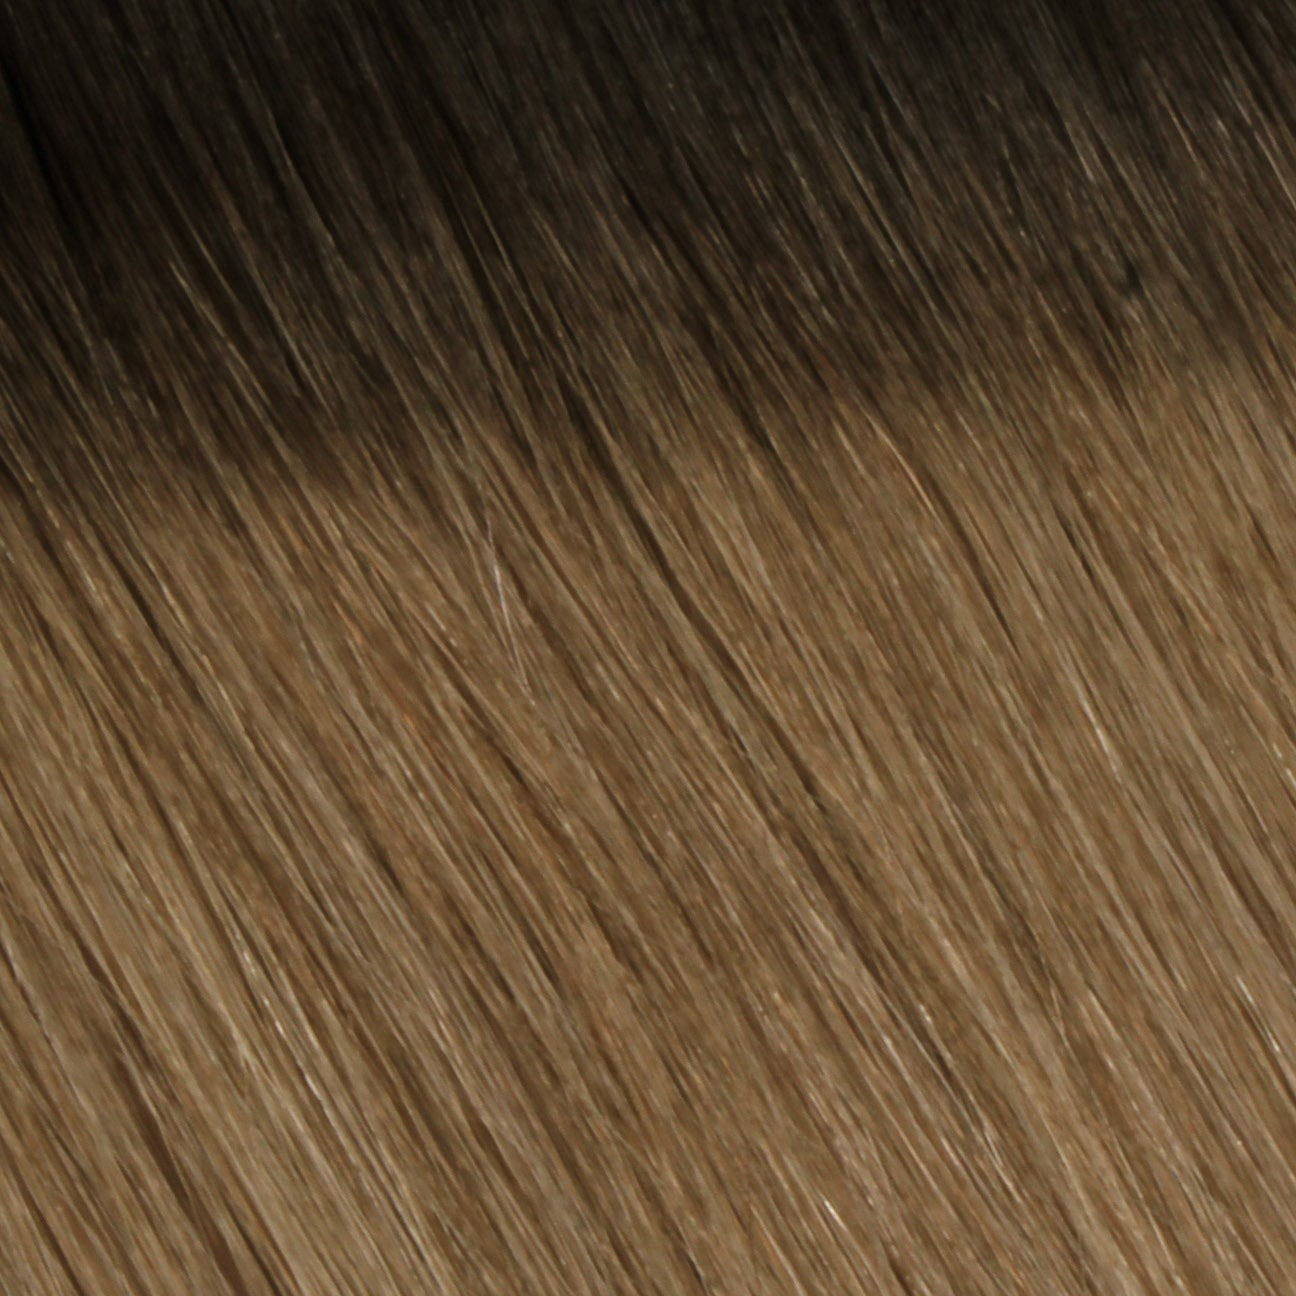 Nano Bonds 20 Inches - SWAY Hair Extensions Mochaccino-Melt-R2-6-24 Ultra-fine, invisible bonds for a flawless, natural look. 100% Remy Human hair, lightweight and versatile. Reusable and perfect for individual or salon use.